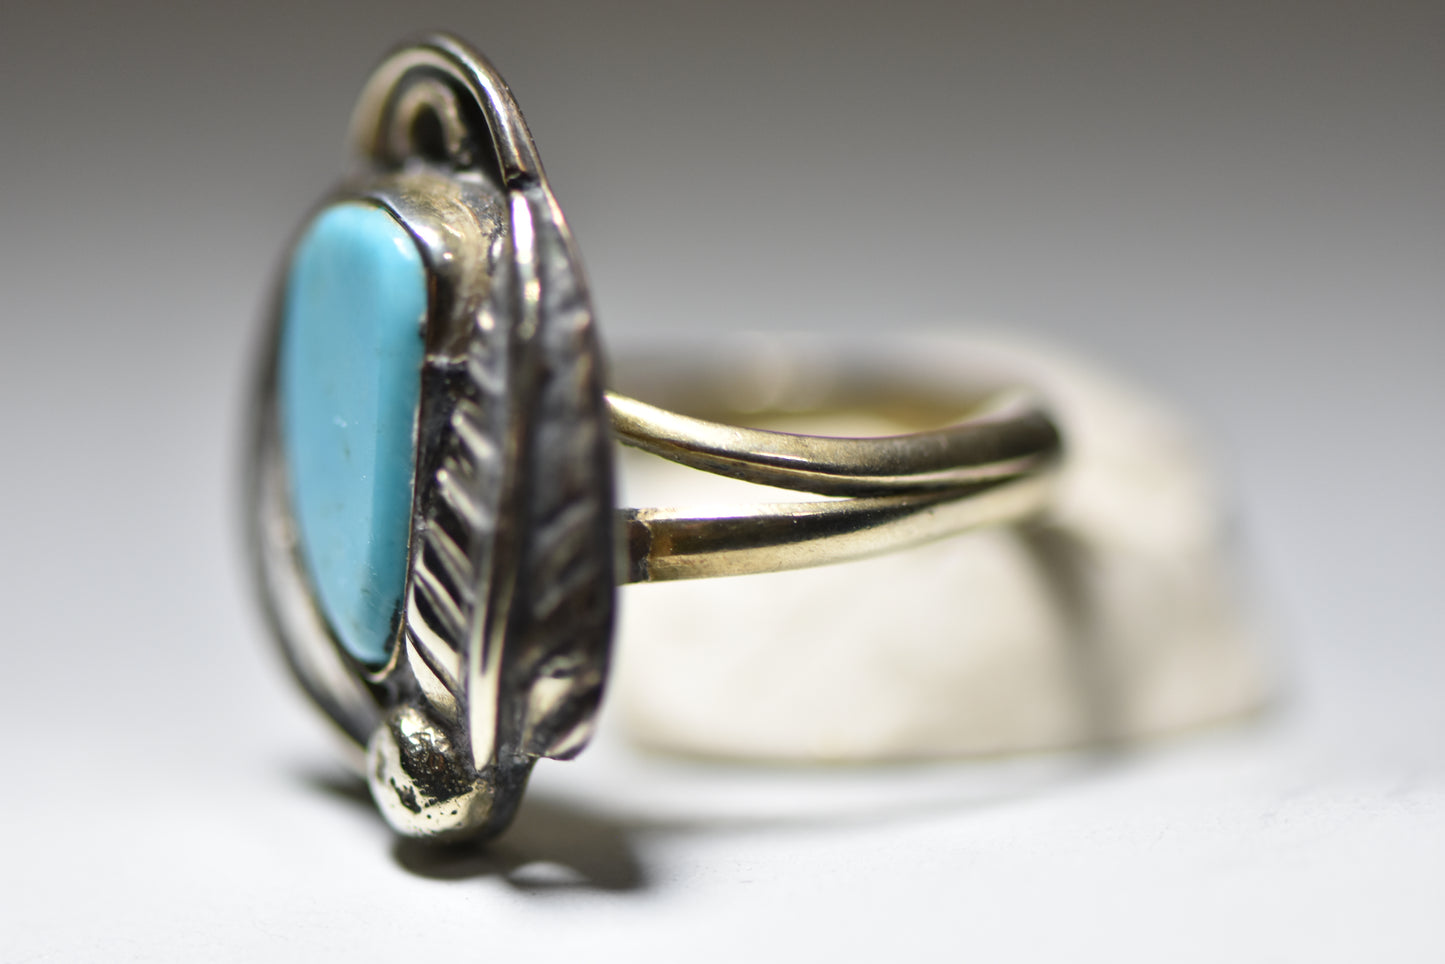 Turquoise Ring Navajo southwest feathers girls women sterling silver